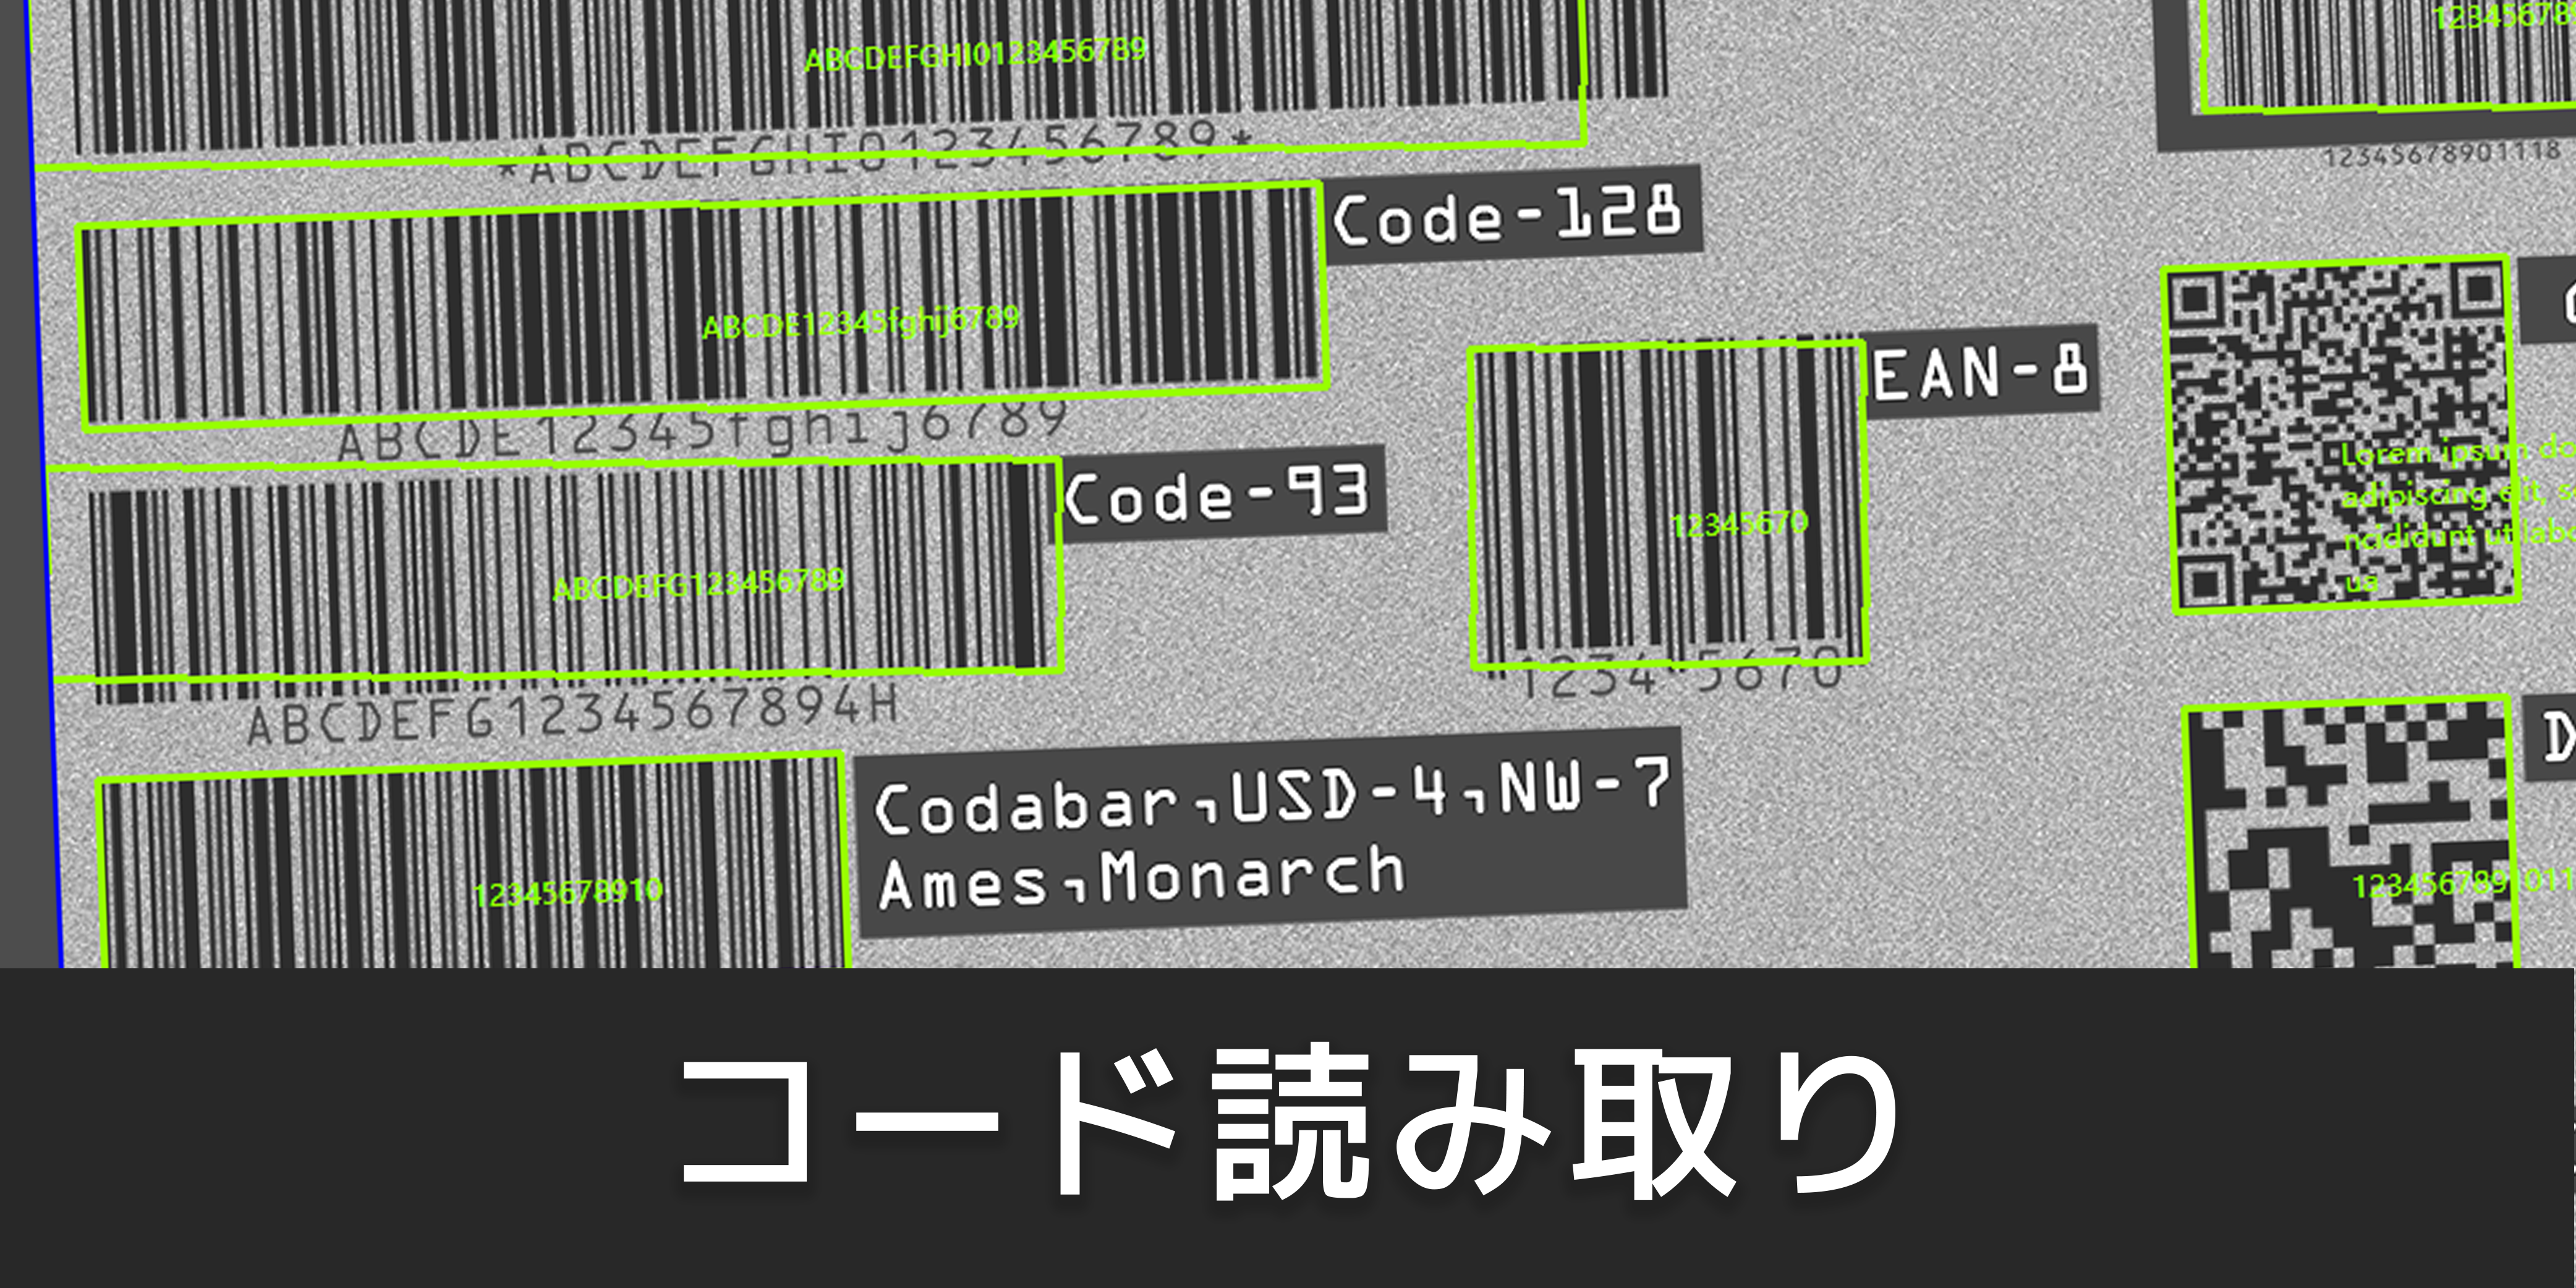 code_recognition